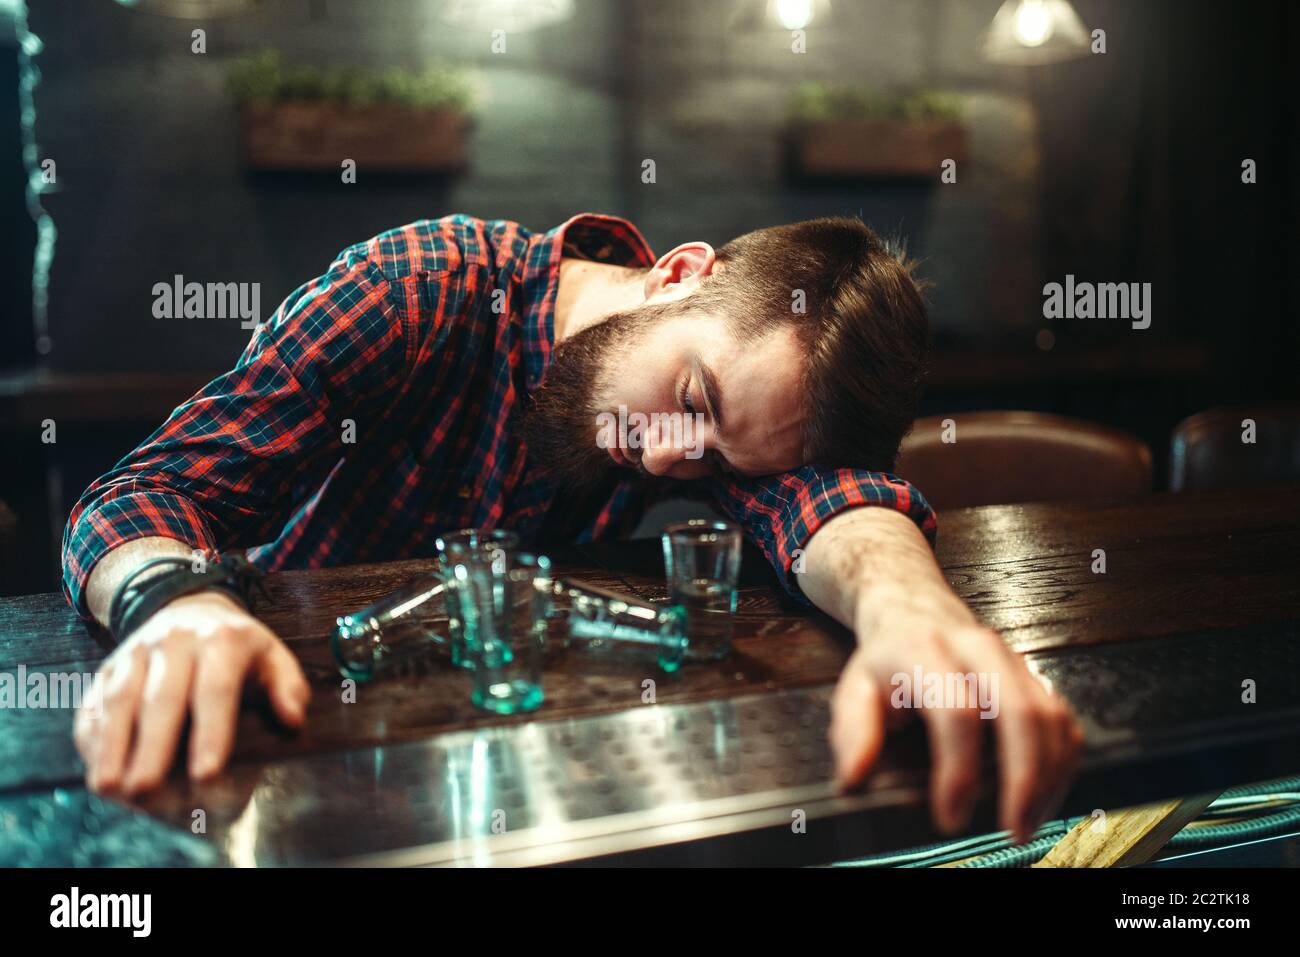 Drunk man sleeps at the bar counter, alcohol addiction. Male person in ...